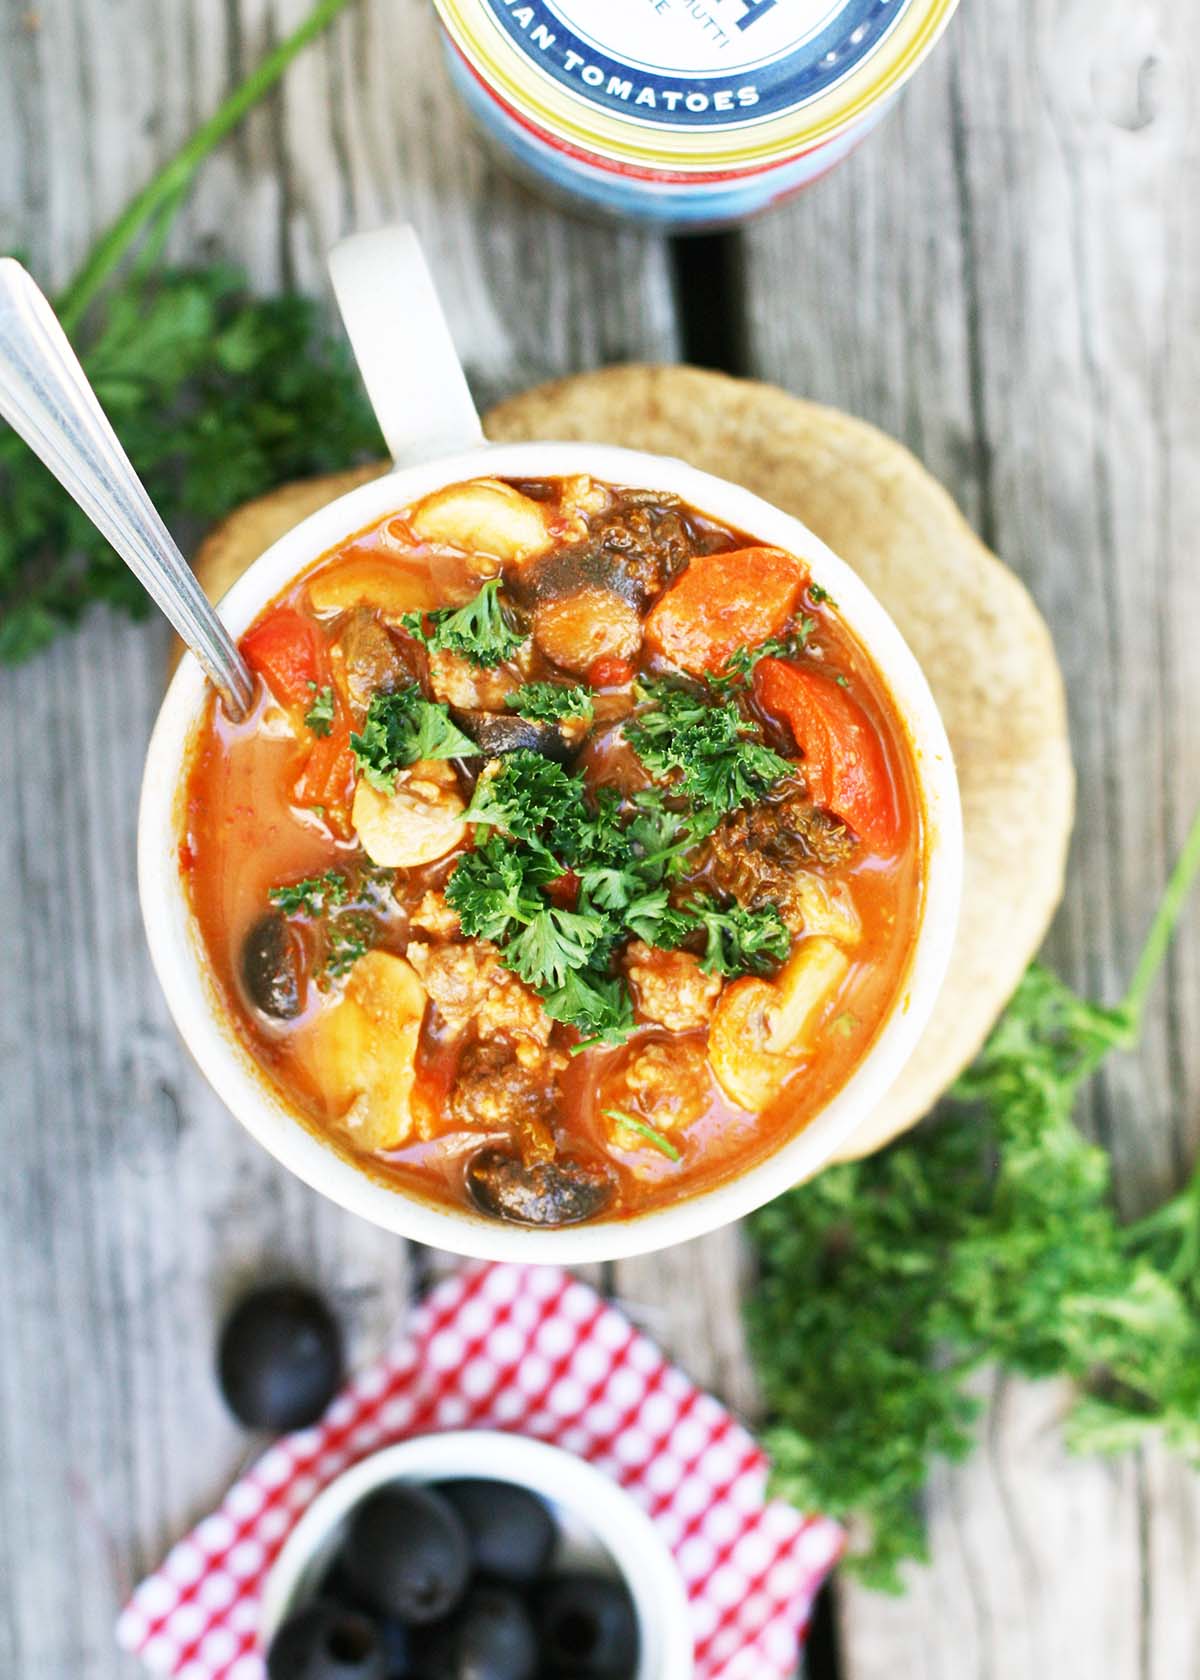 Pizza stew: All the pizza flavor in a thick, veggie-packed stew! Click through for recipe.